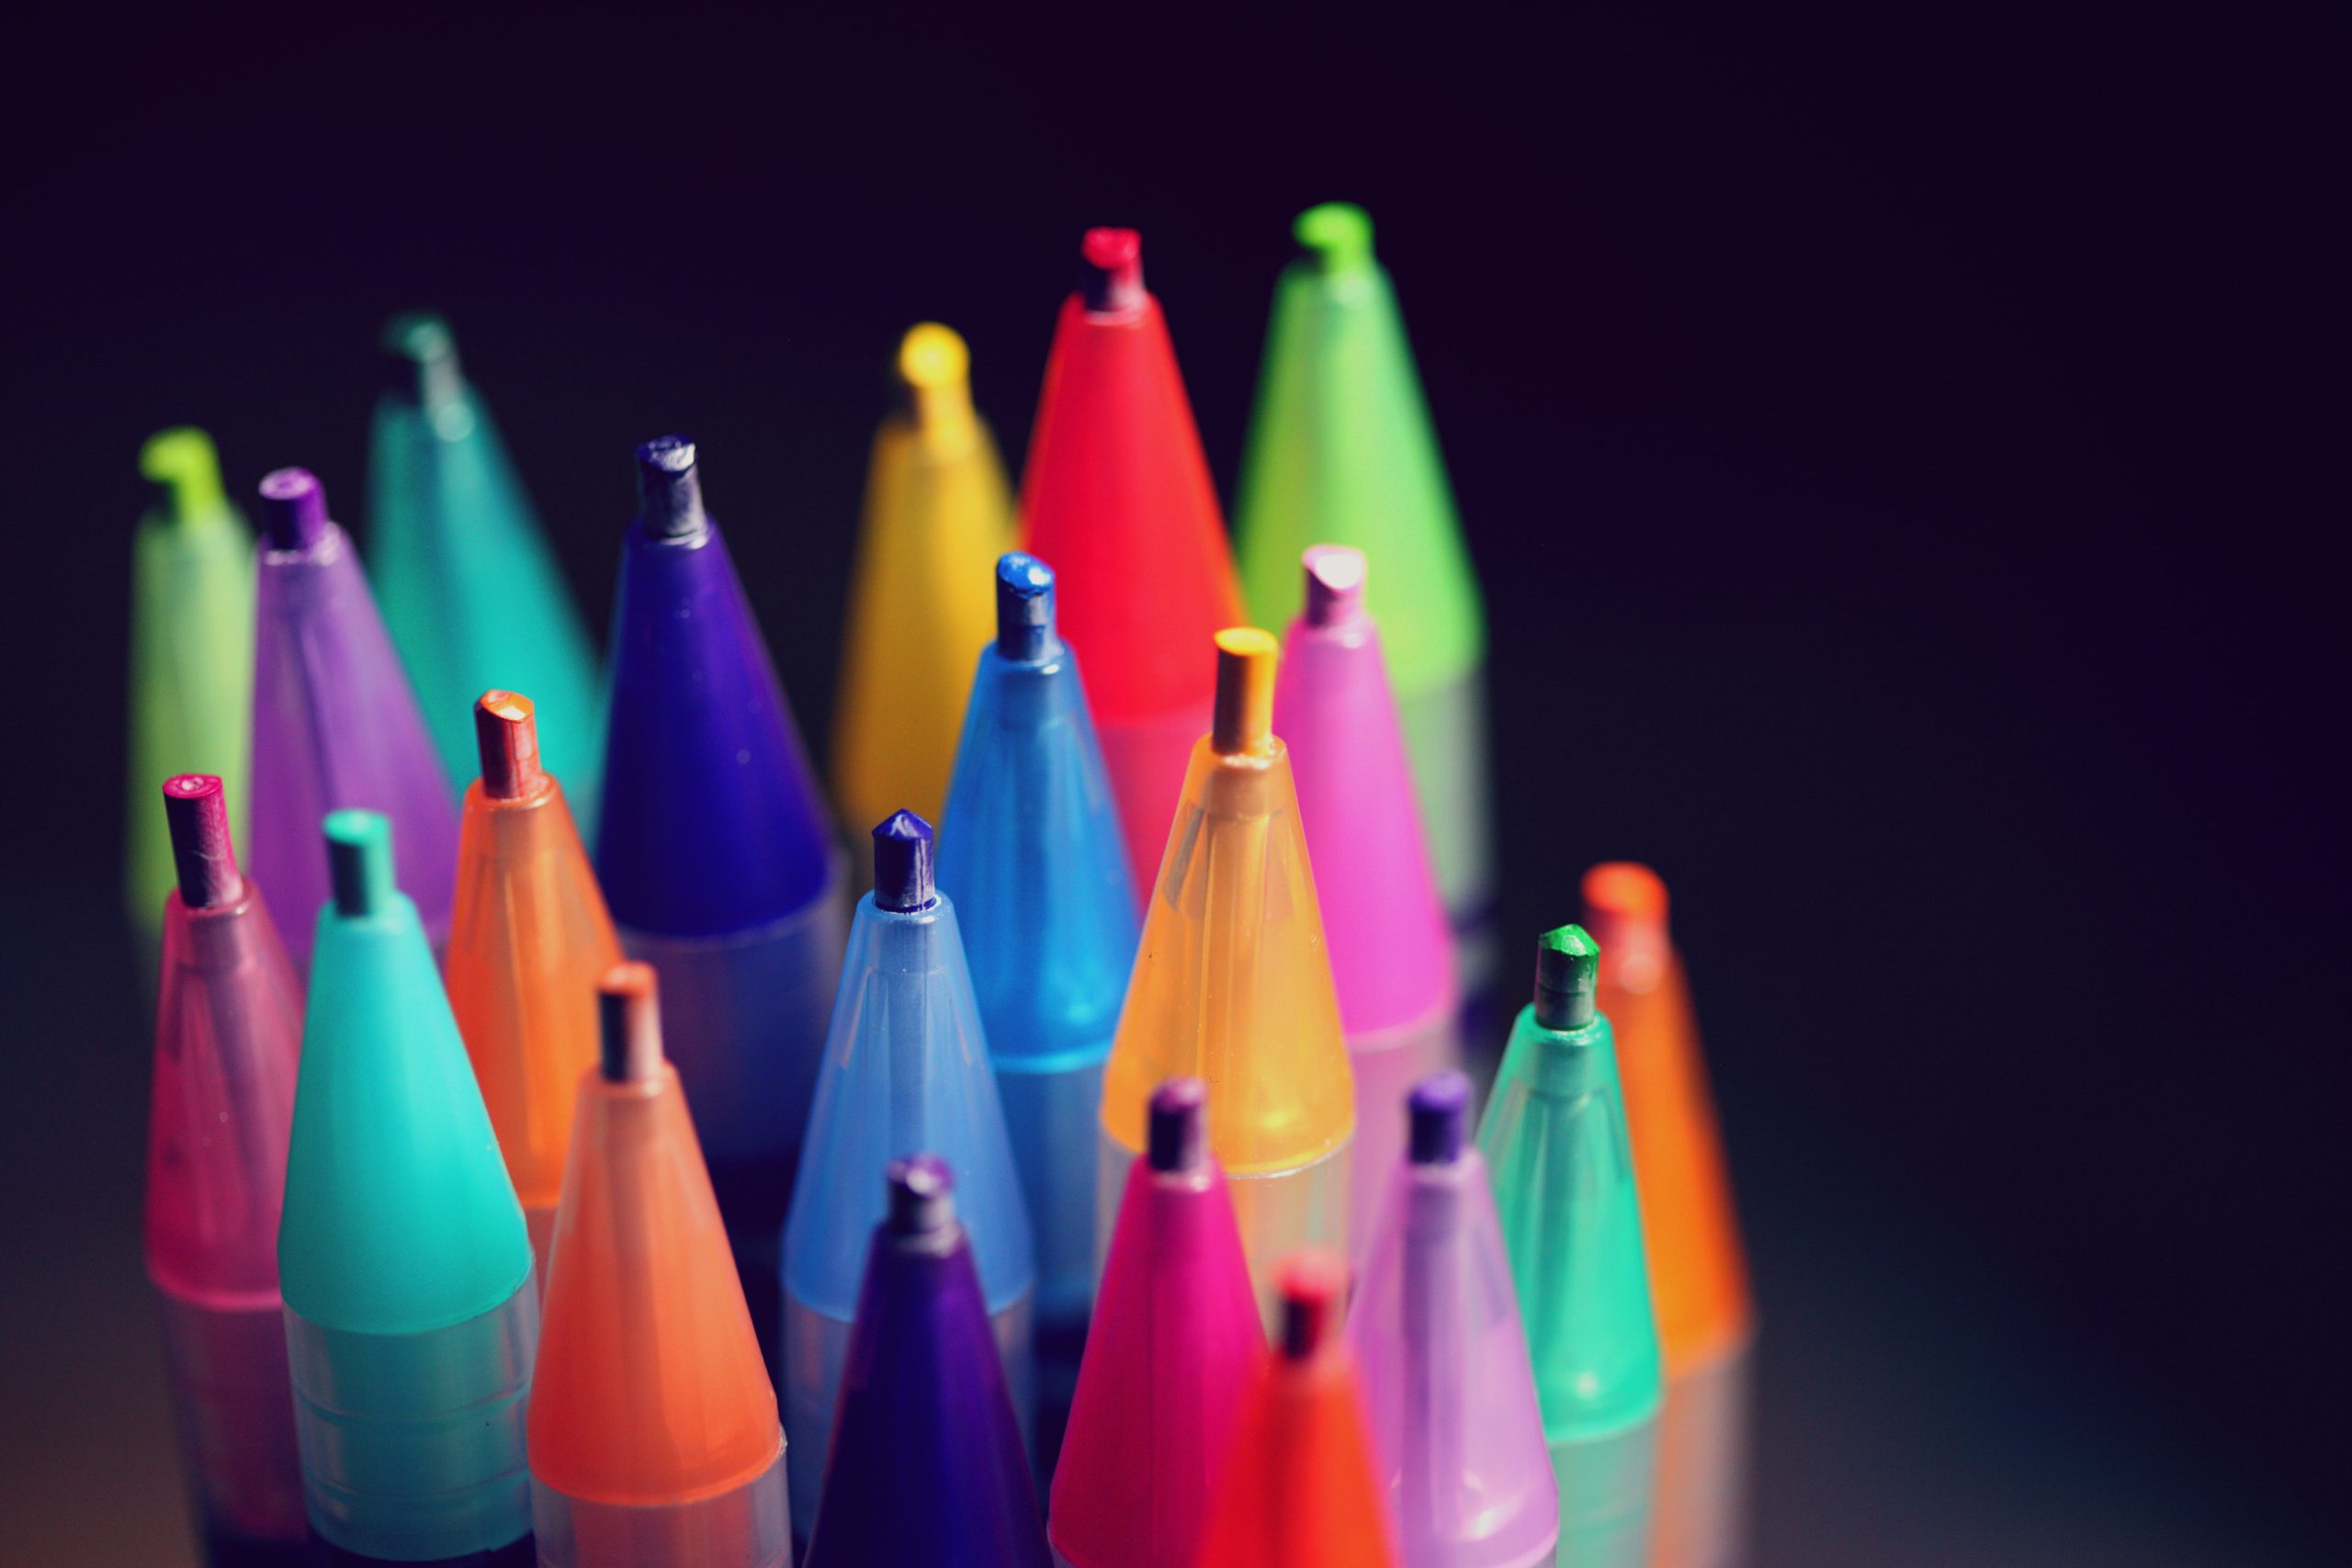 Colored pencils. Photo by Alexander Grey on Unsplash